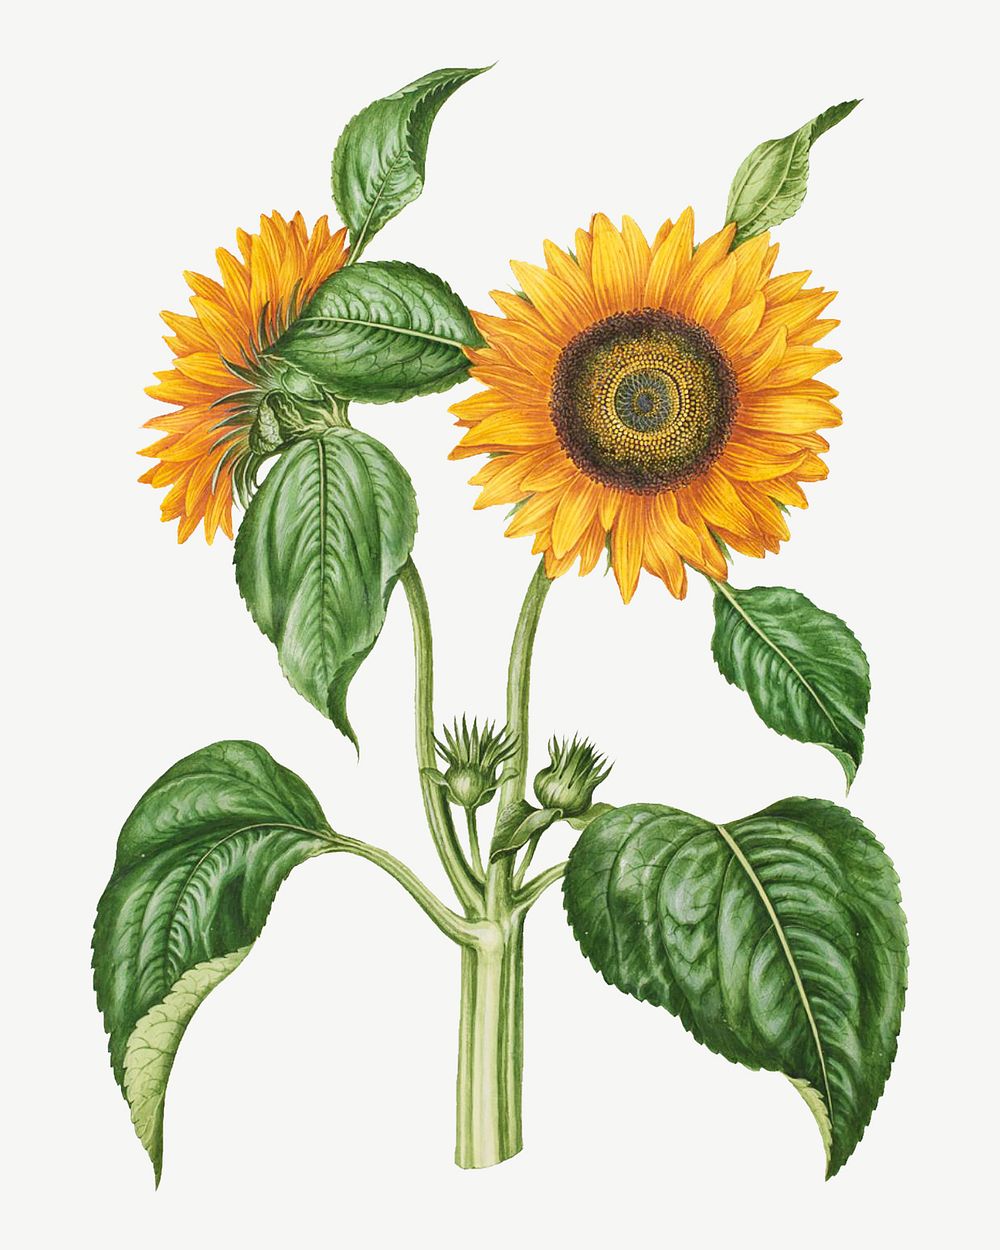 Vintage sunflower, flower illustration by Maria Sibylla Merian psd. Remixed by rawpixel.